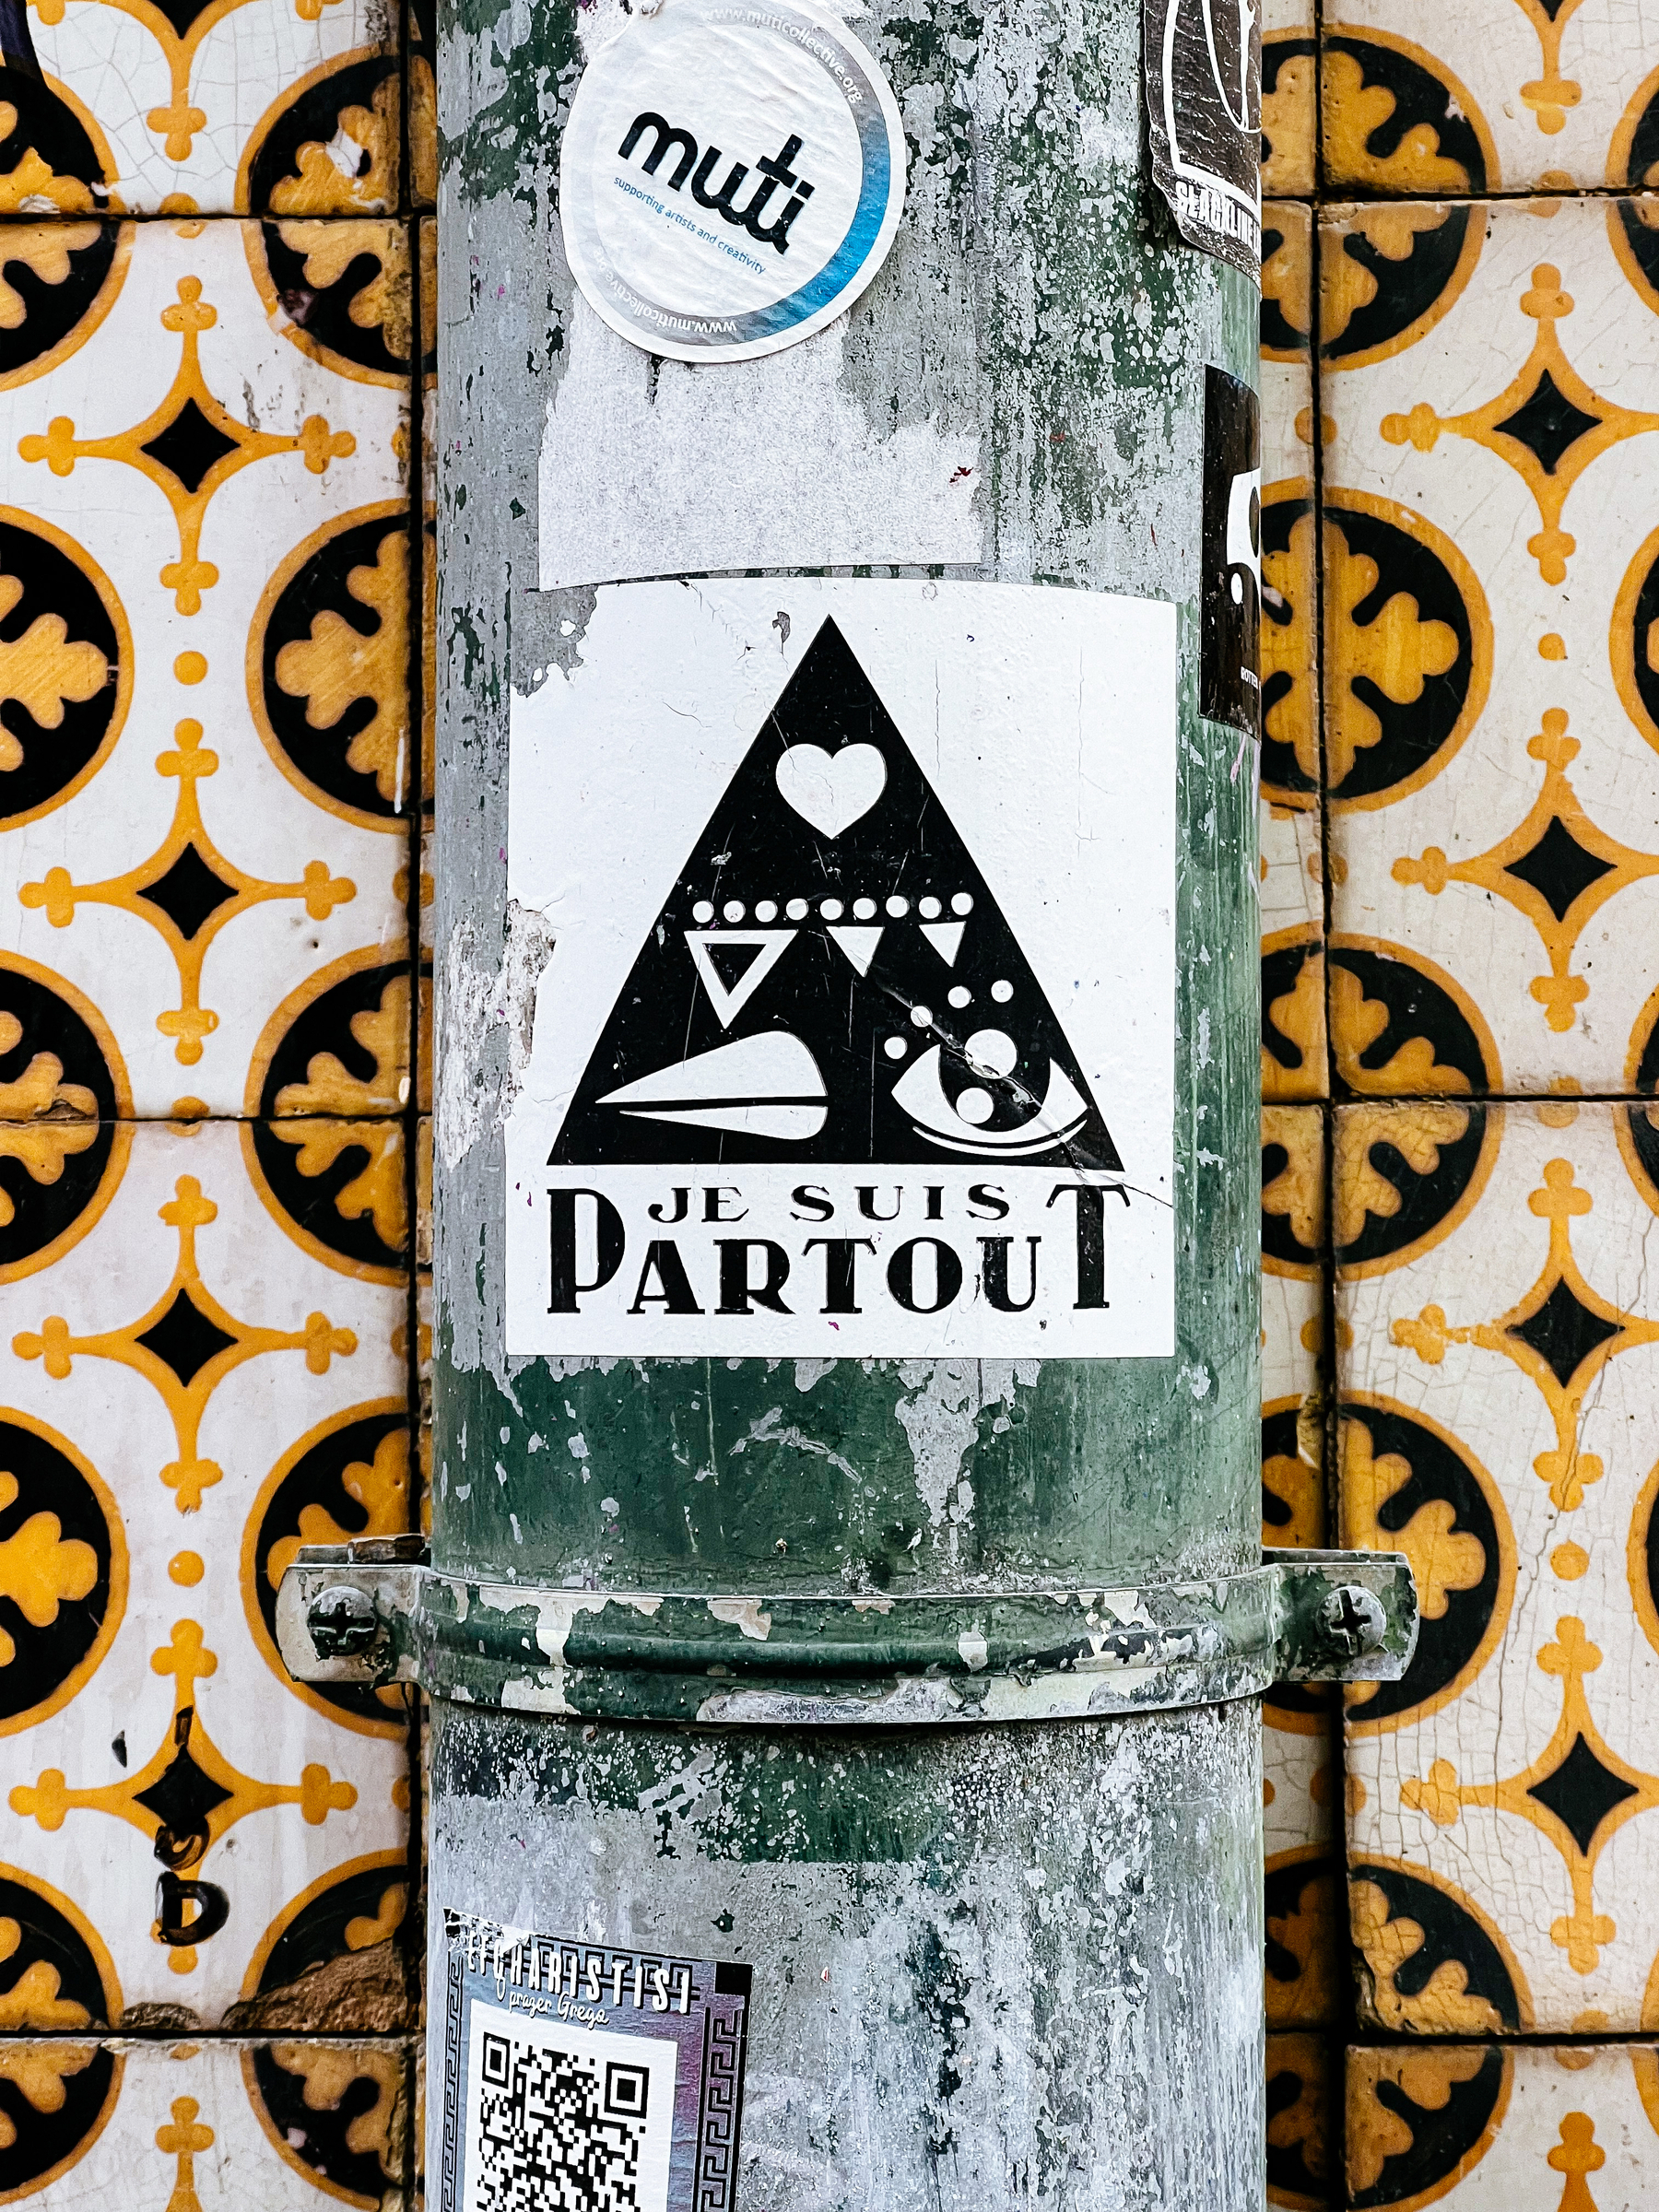 Sticker with the words “je suis partout”, and a black triangle with symbols inside. One of them is a heart 